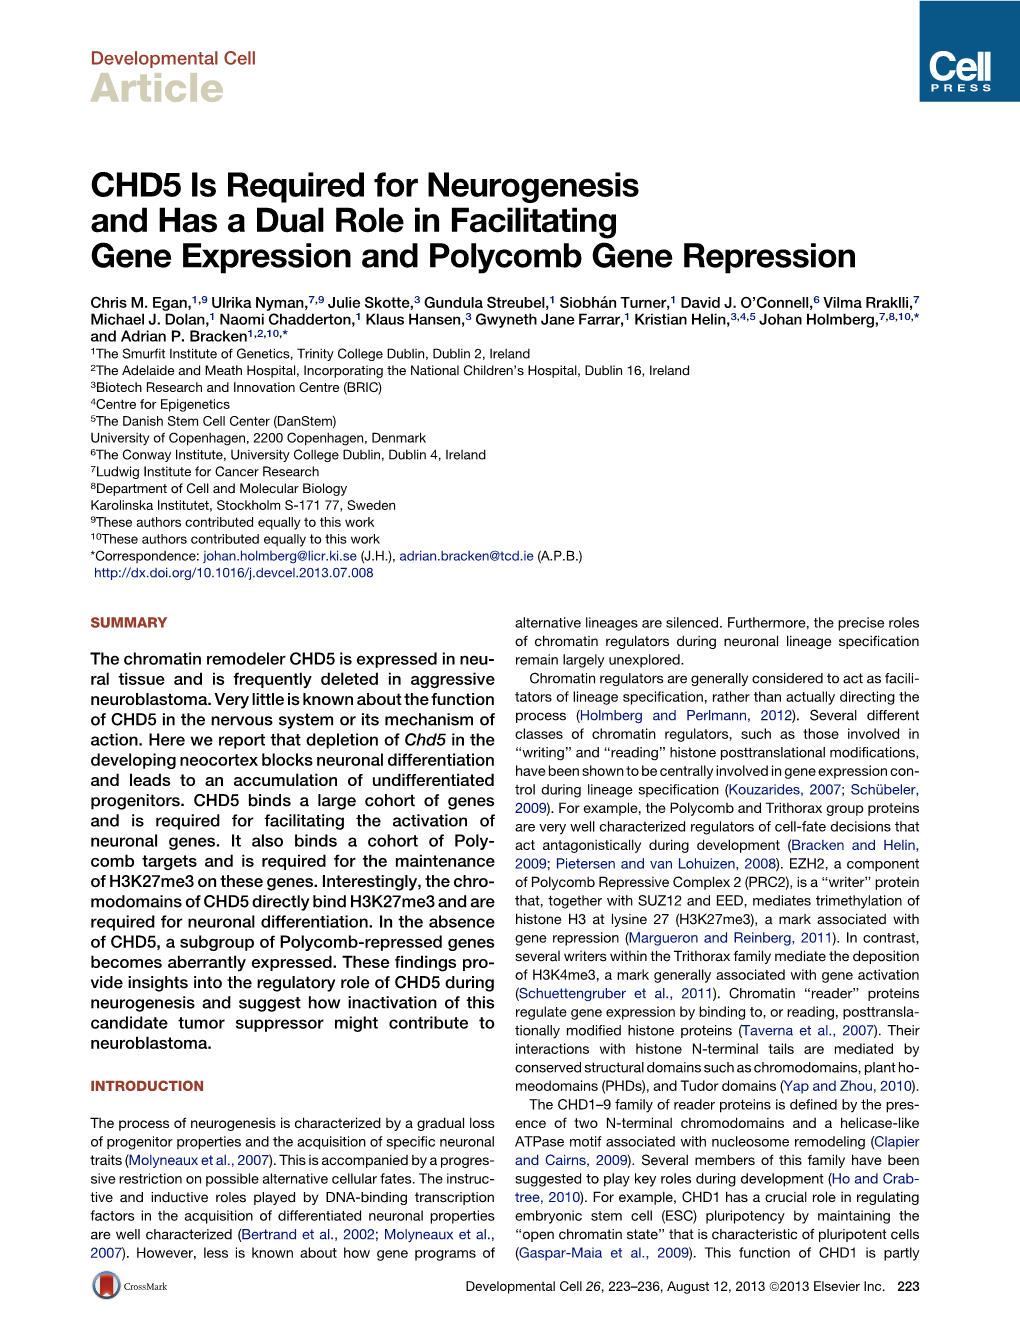 CHD5 Is Required for Neurogenesis and Has a Dual Role in Facilitating Gene Expression and Polycomb Gene Repression